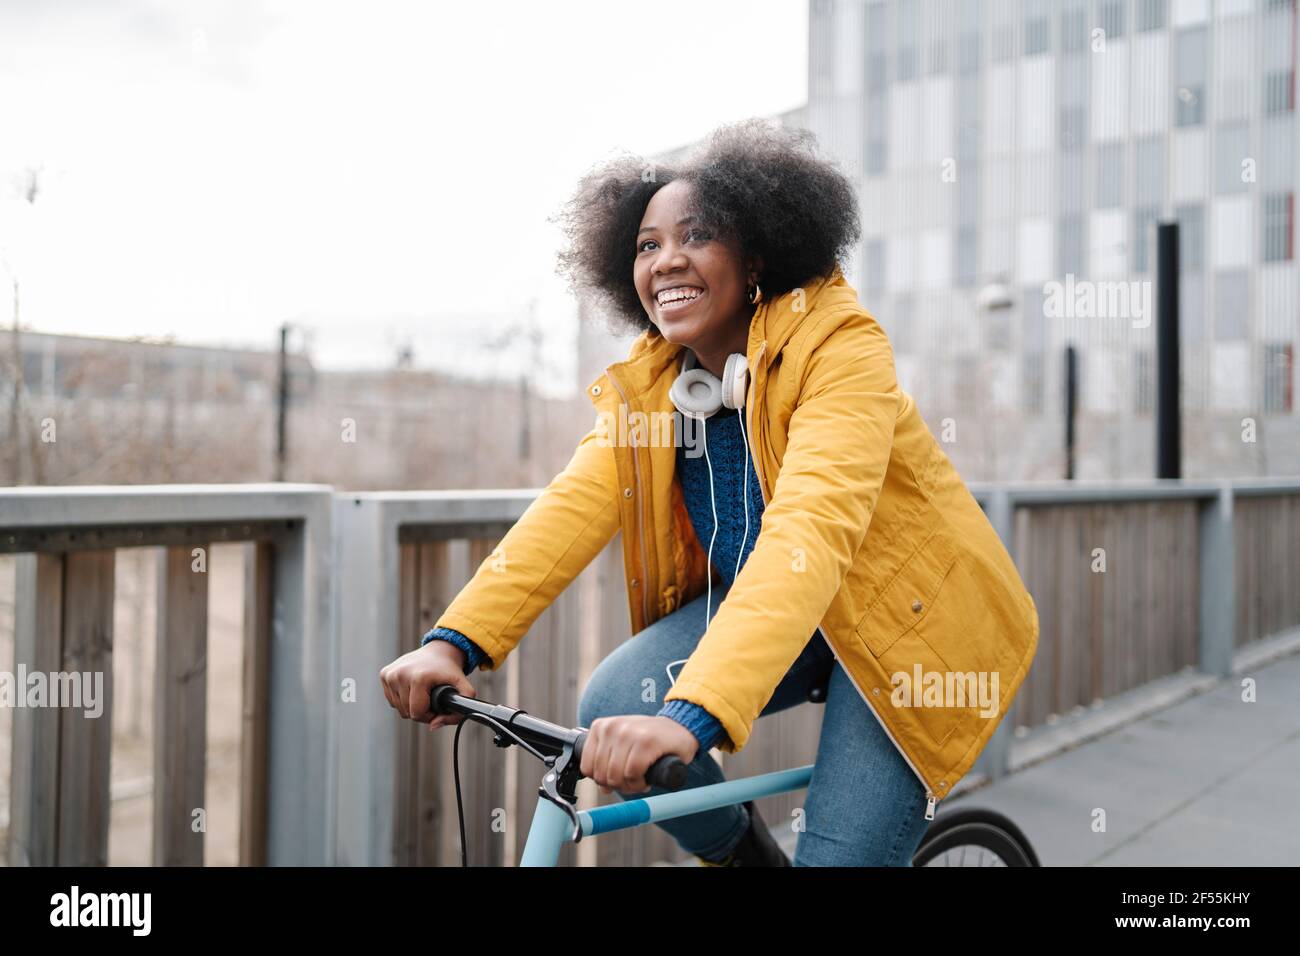 Smiling woman cycling on footpath Stock Photo